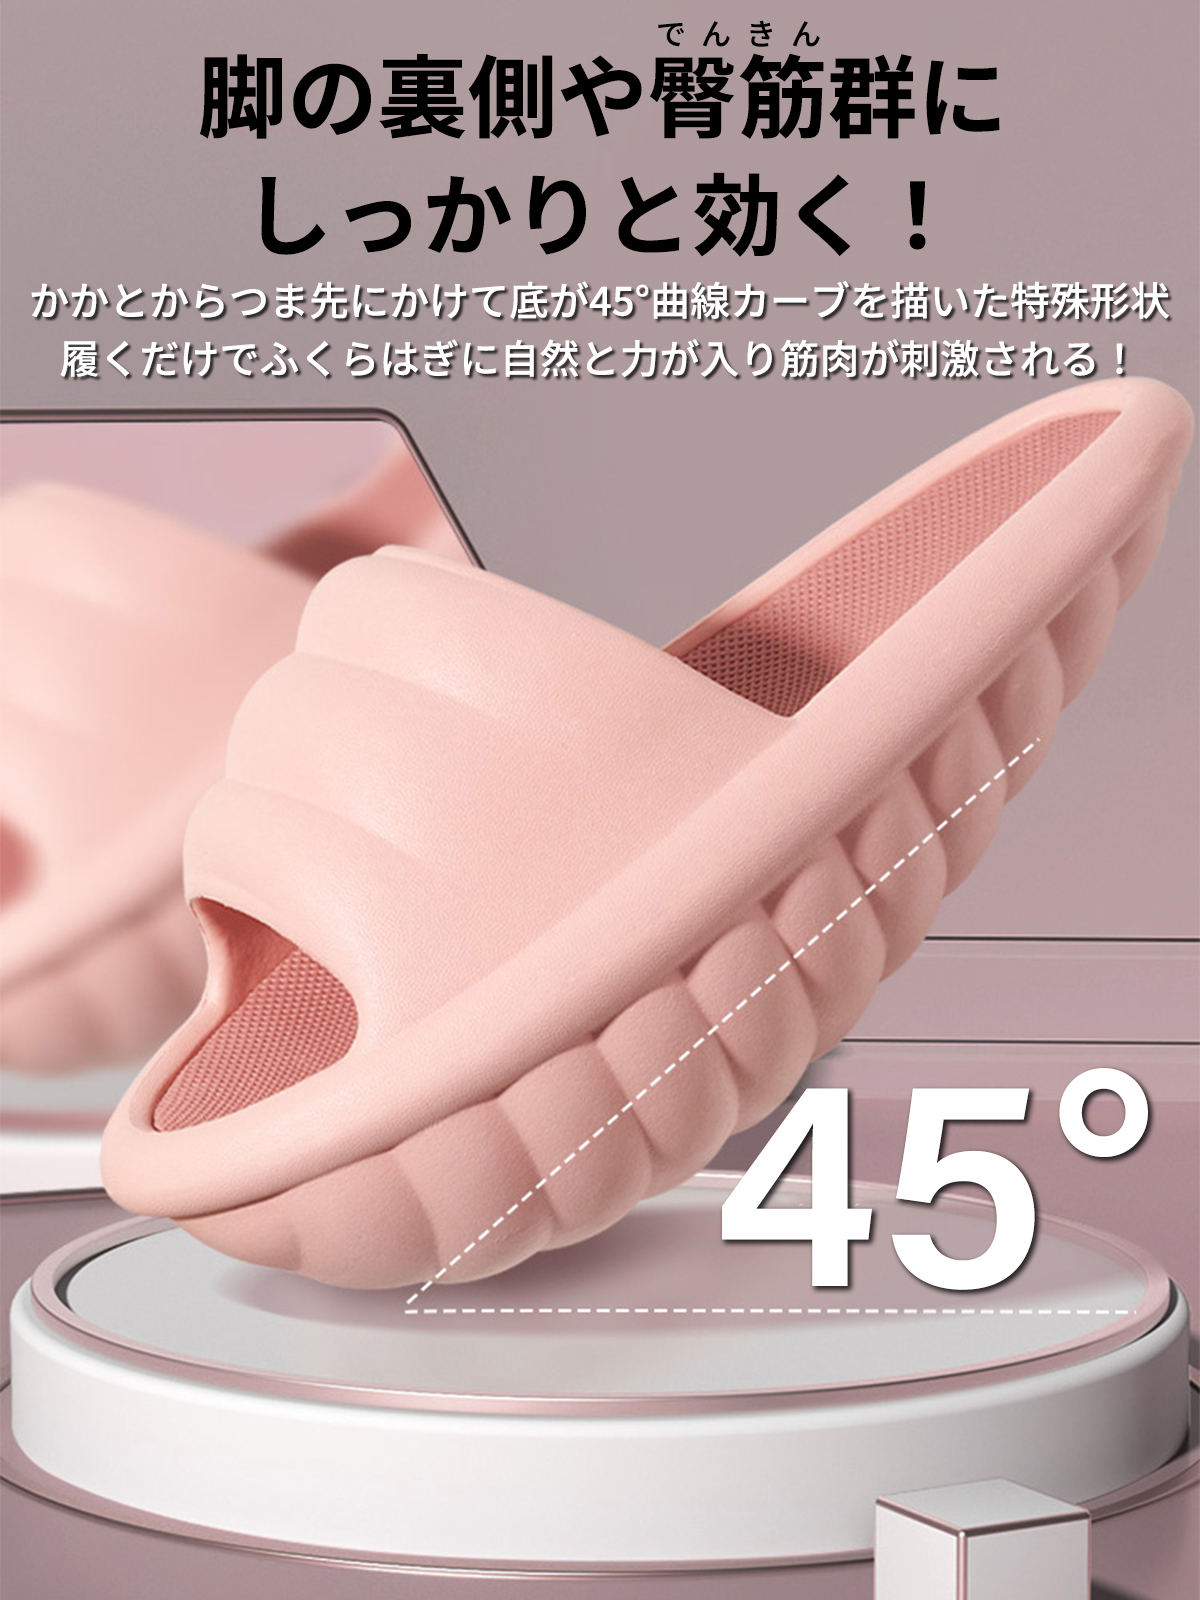  diet slippers effect slippers sandals shoes balance body .O legs lady's men's interior motion stretch diet health pink black 